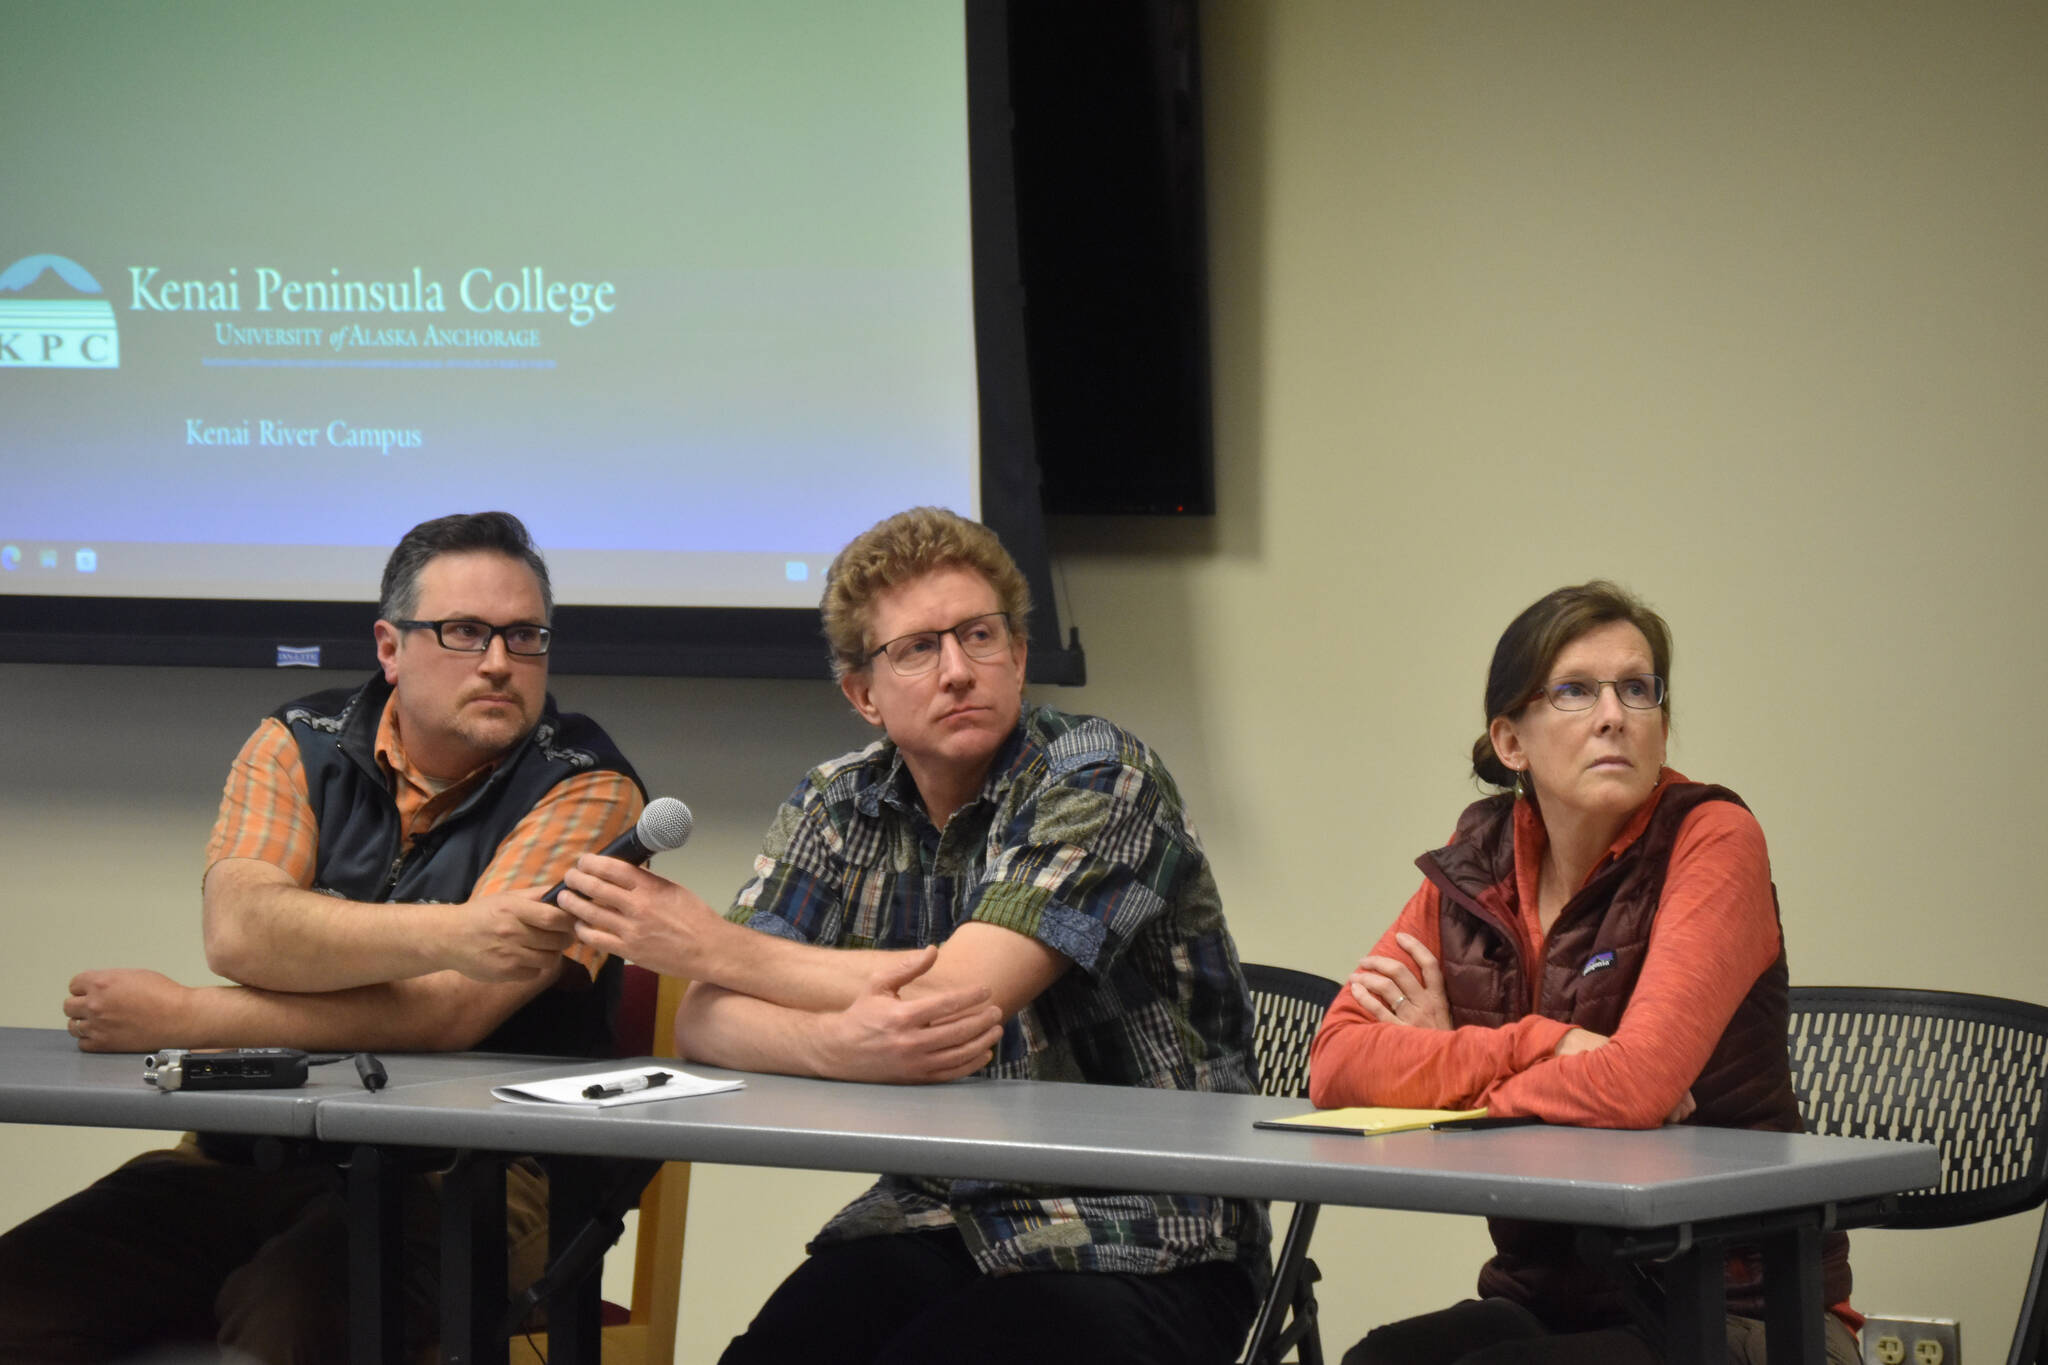 University of Alaska Fairbanks Associate Professor Dr. Peter Westley, Department of Fish and Game Biologist Adam Reimer, and Cook Inletkeeper Science Director Sue Mauger listen to a question during a panel discussion for the Kenai Peninsula College Showcase "State of the Salmon" on Wednesday, April 20, 2023, at KPC in Soldotna, Alaska. (Jake Dye/Peninsula Clarion)